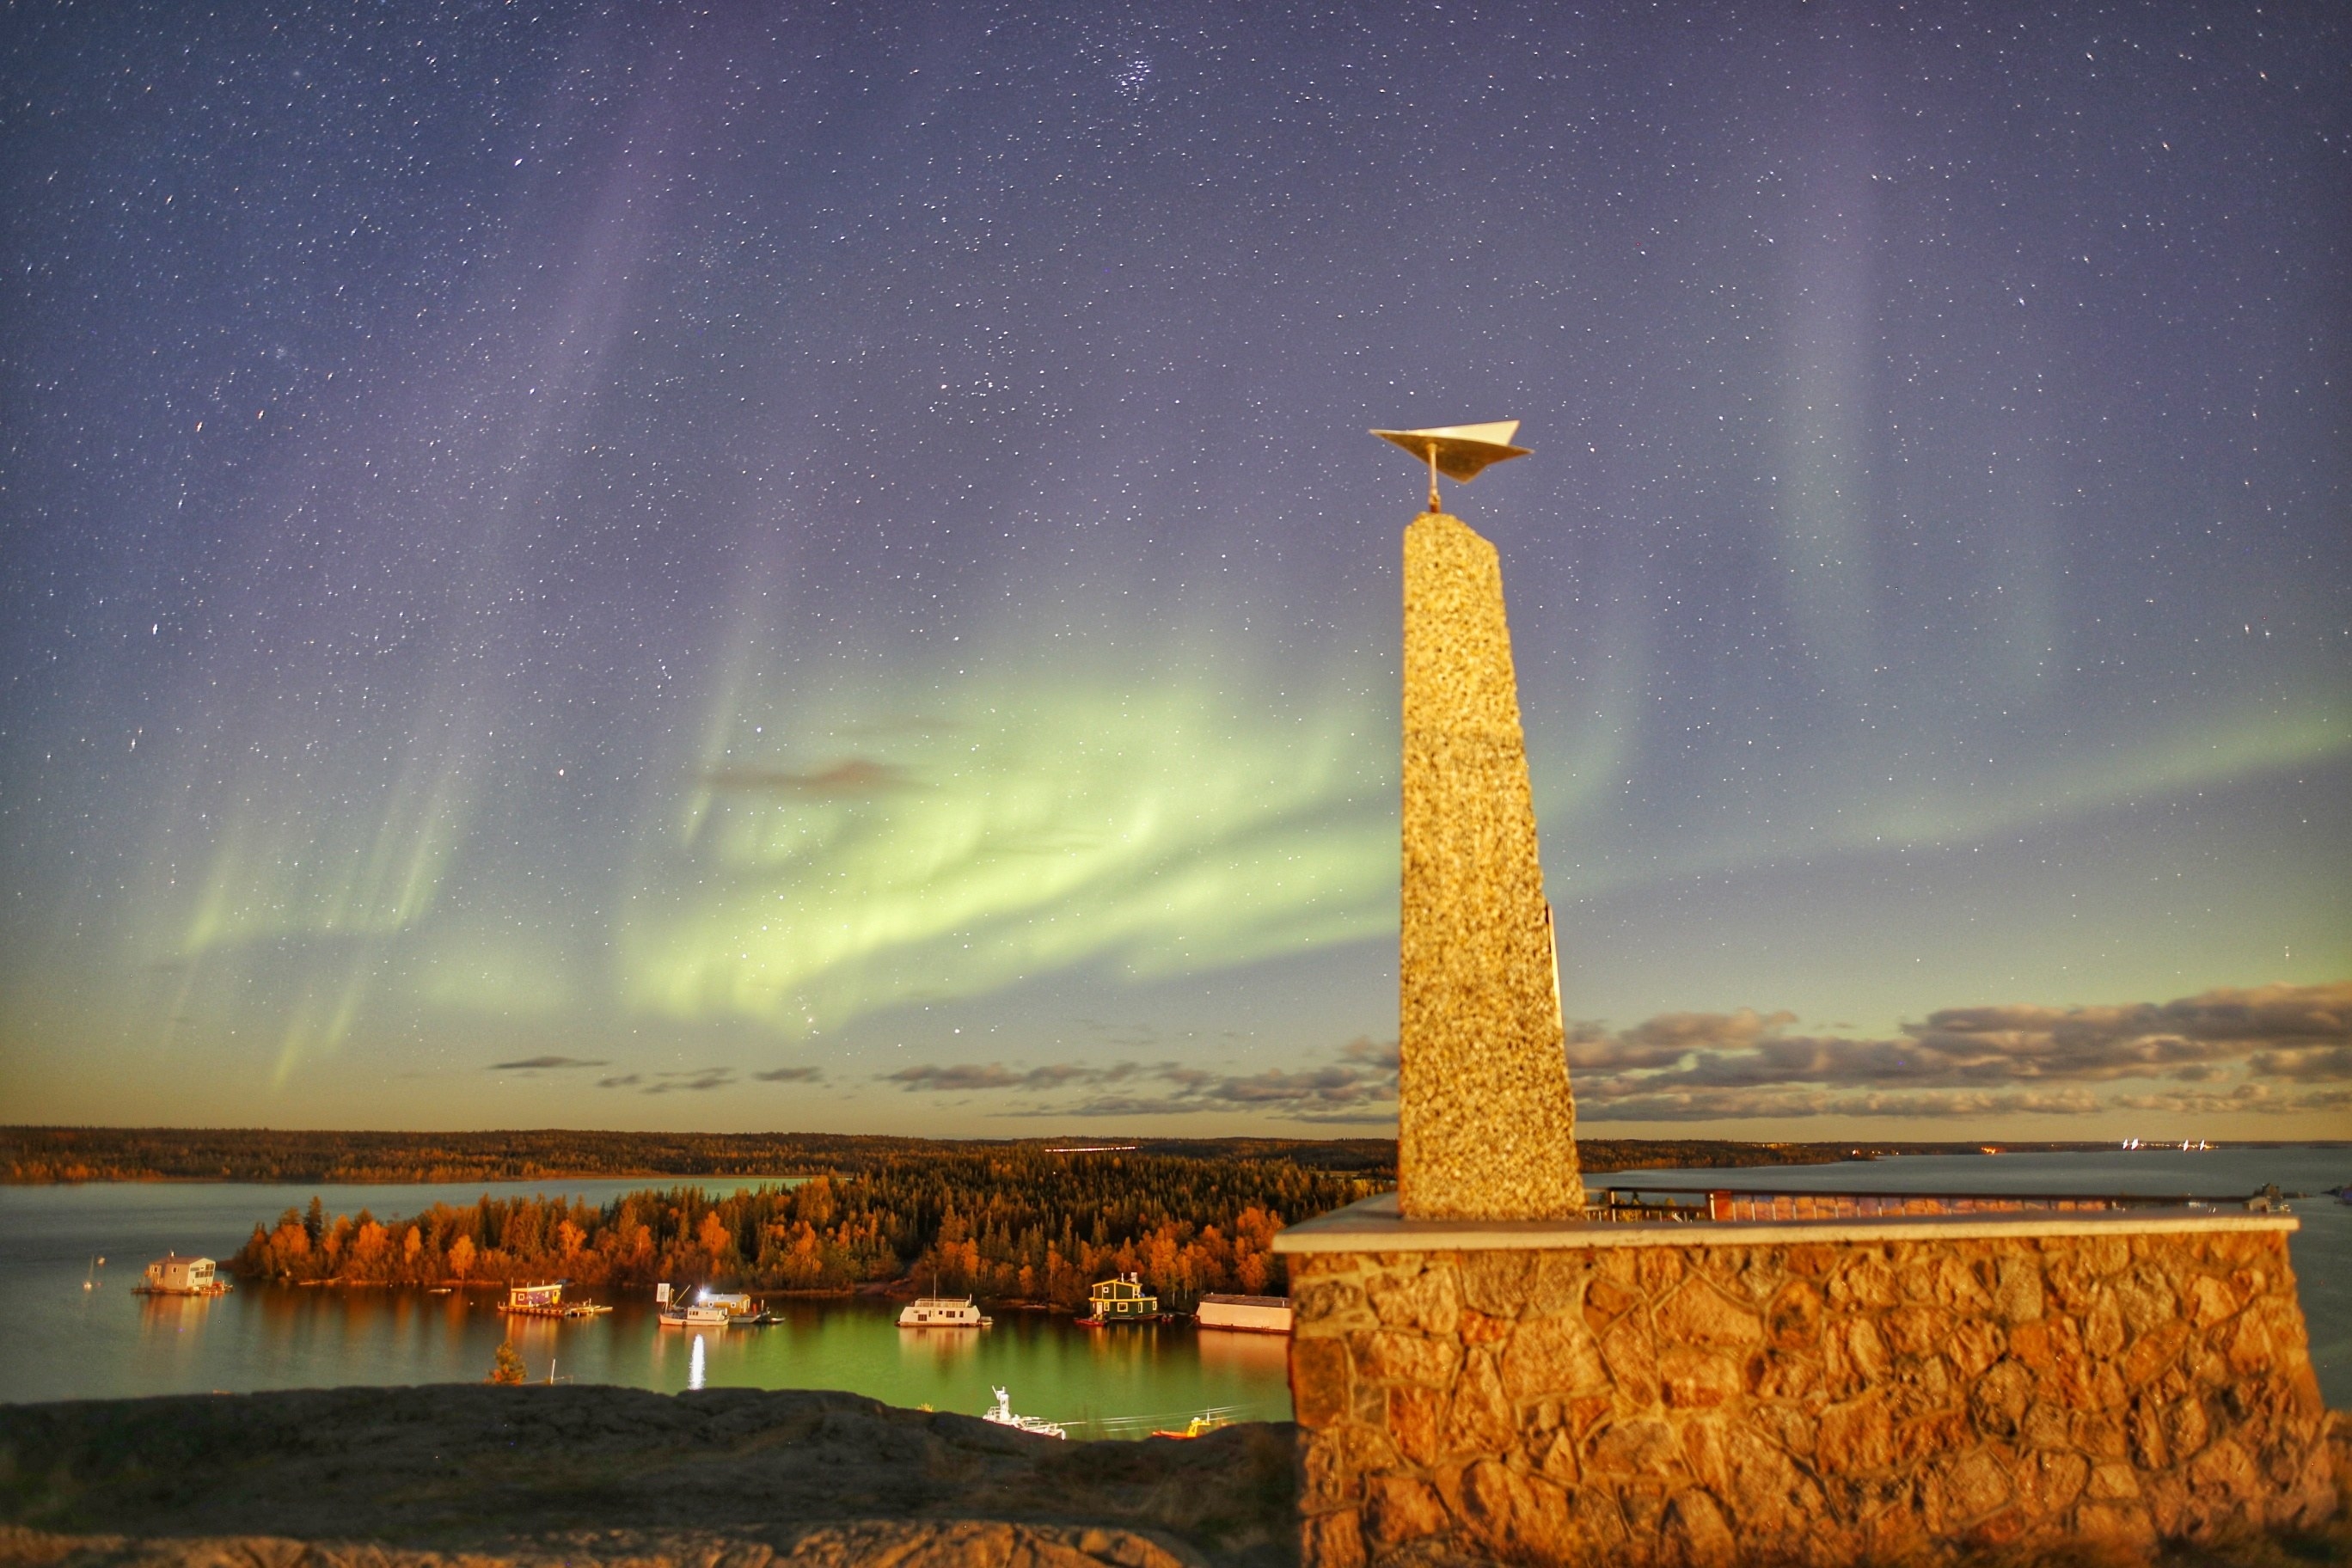 The city of Yellowknife and the northern lights